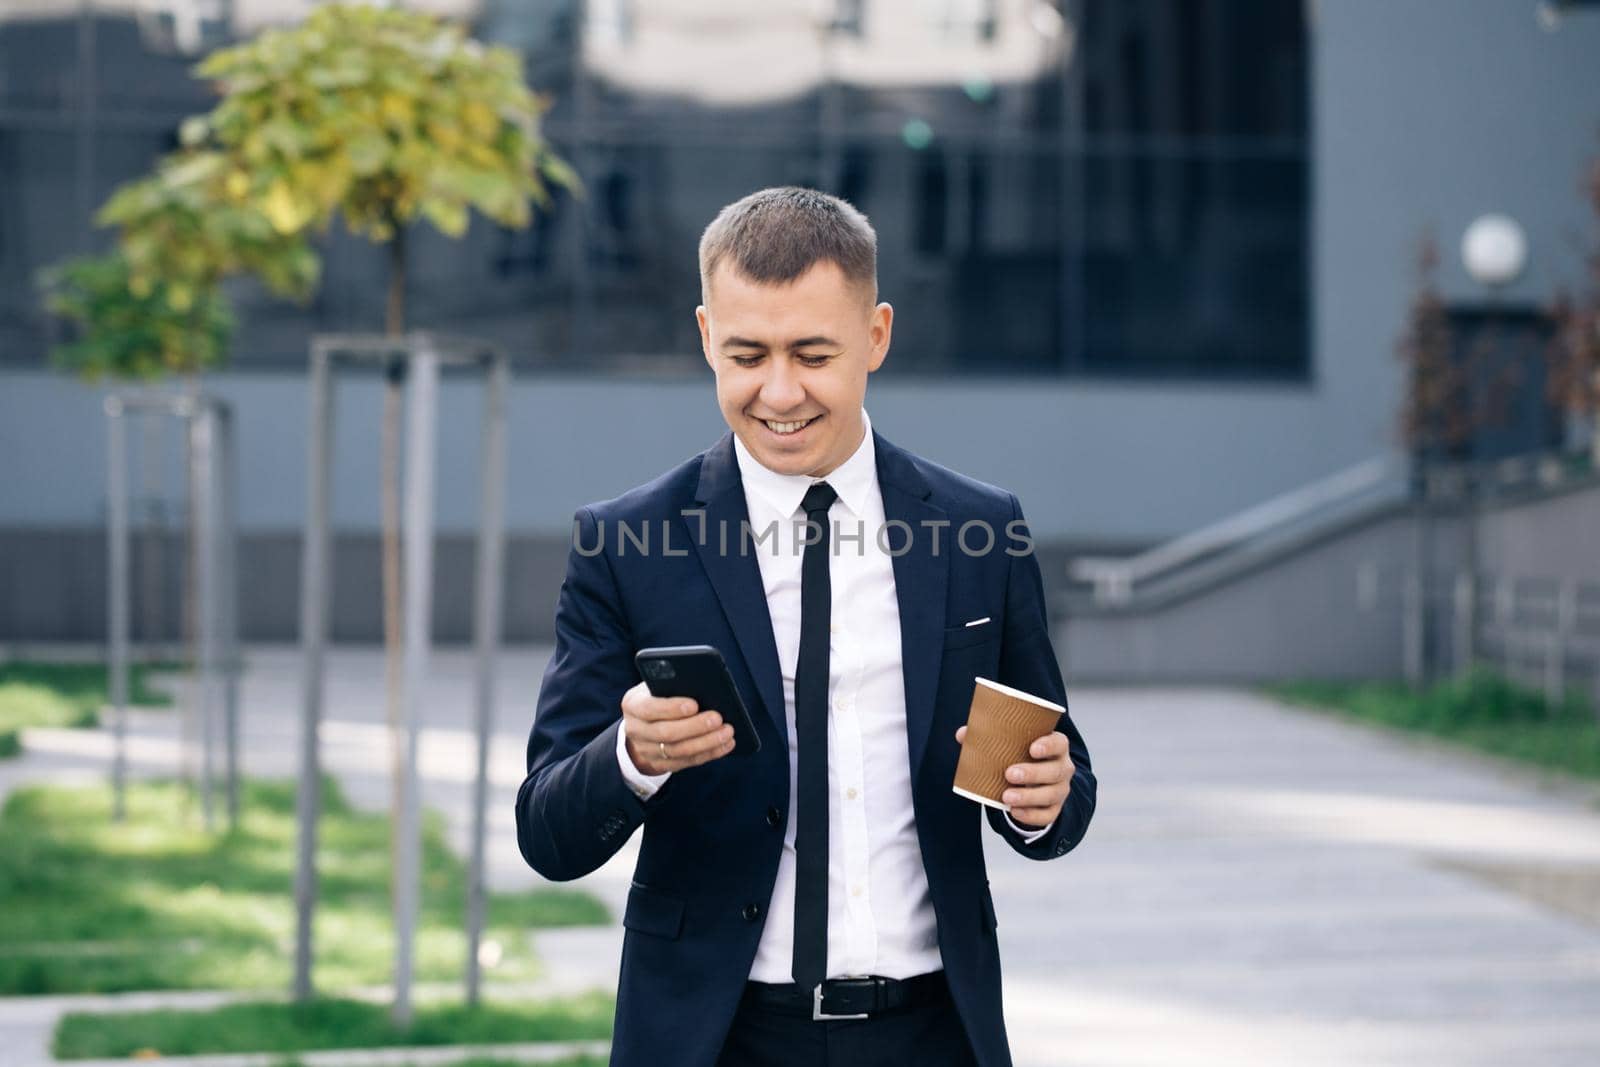 Stylish Businessman Exiting from the Modern Office. Using his Smartphone. Sliding on Mobiles Screen. Drinking Tasty Coffee. Looking Successful, Confident. Holding Coffee Cup on Summer Day.